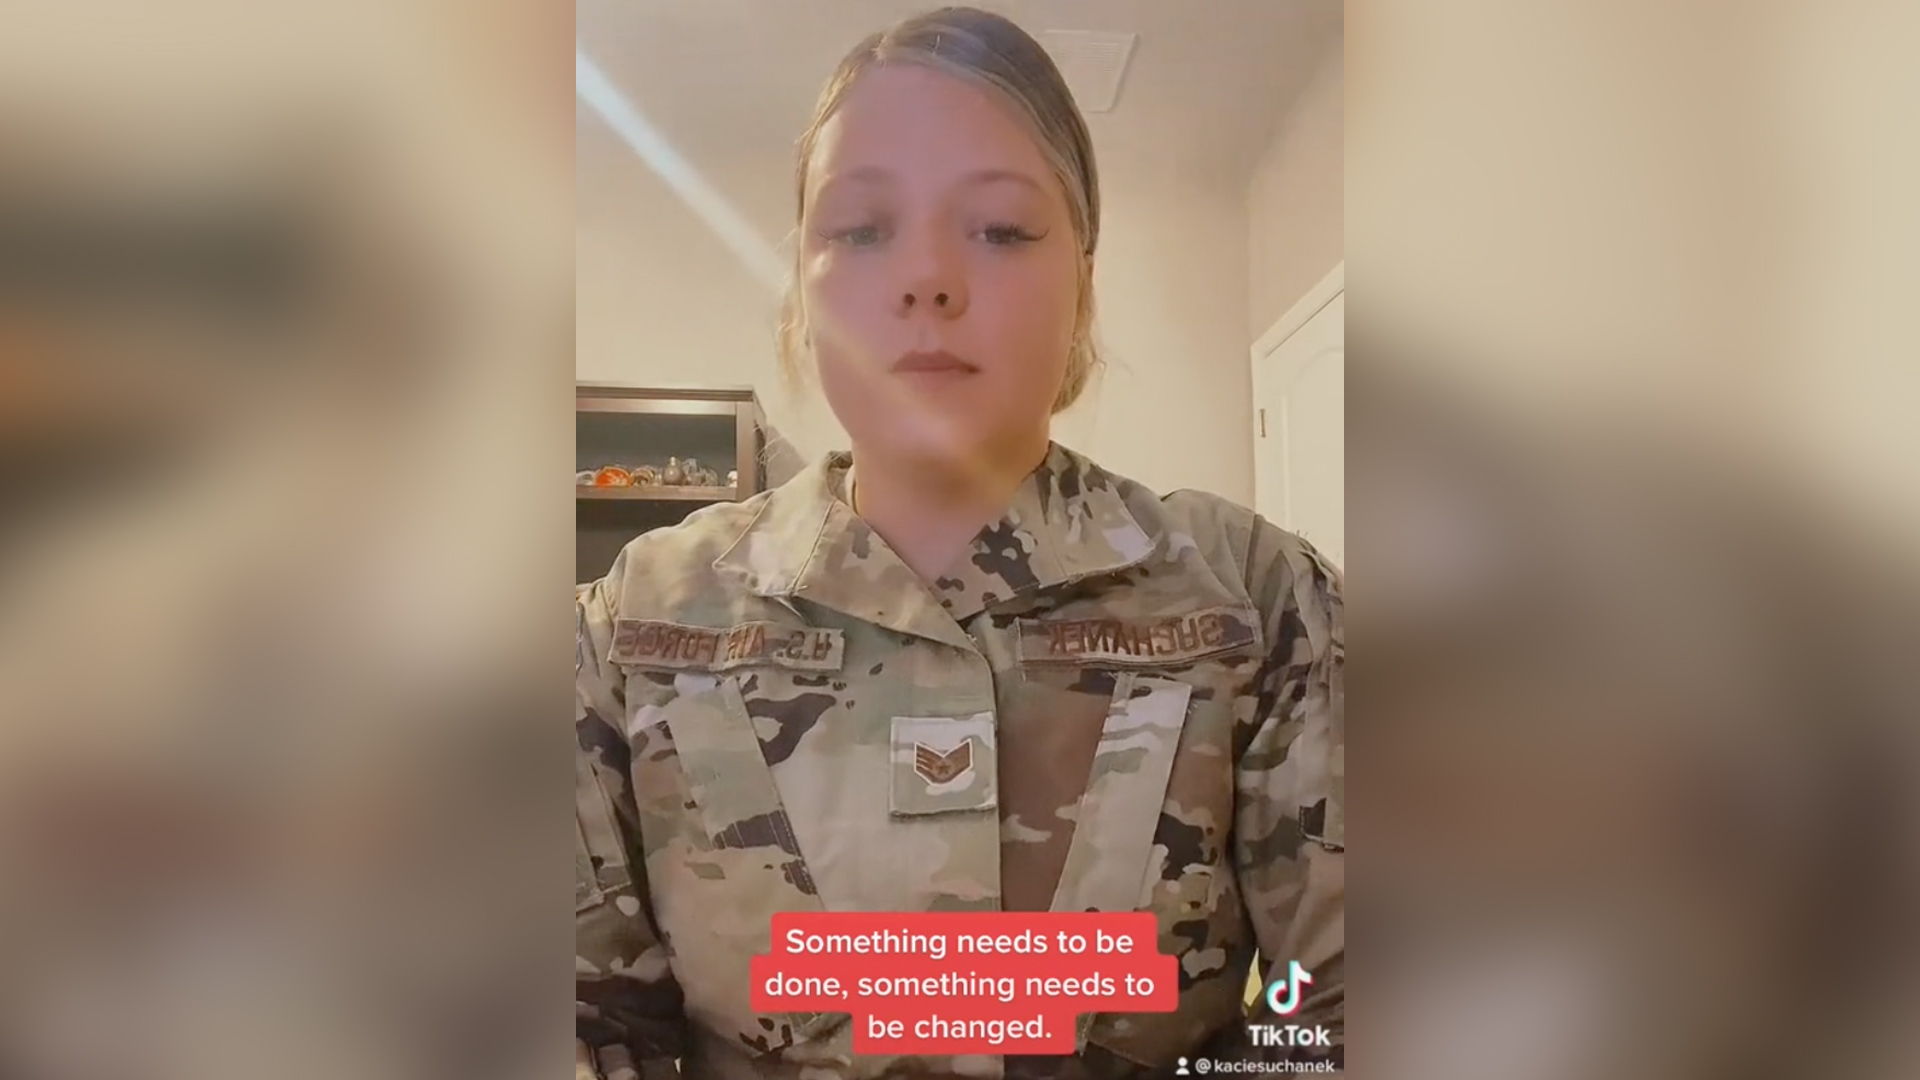 Air Force member goes public with allegations of assault on TikTok photo